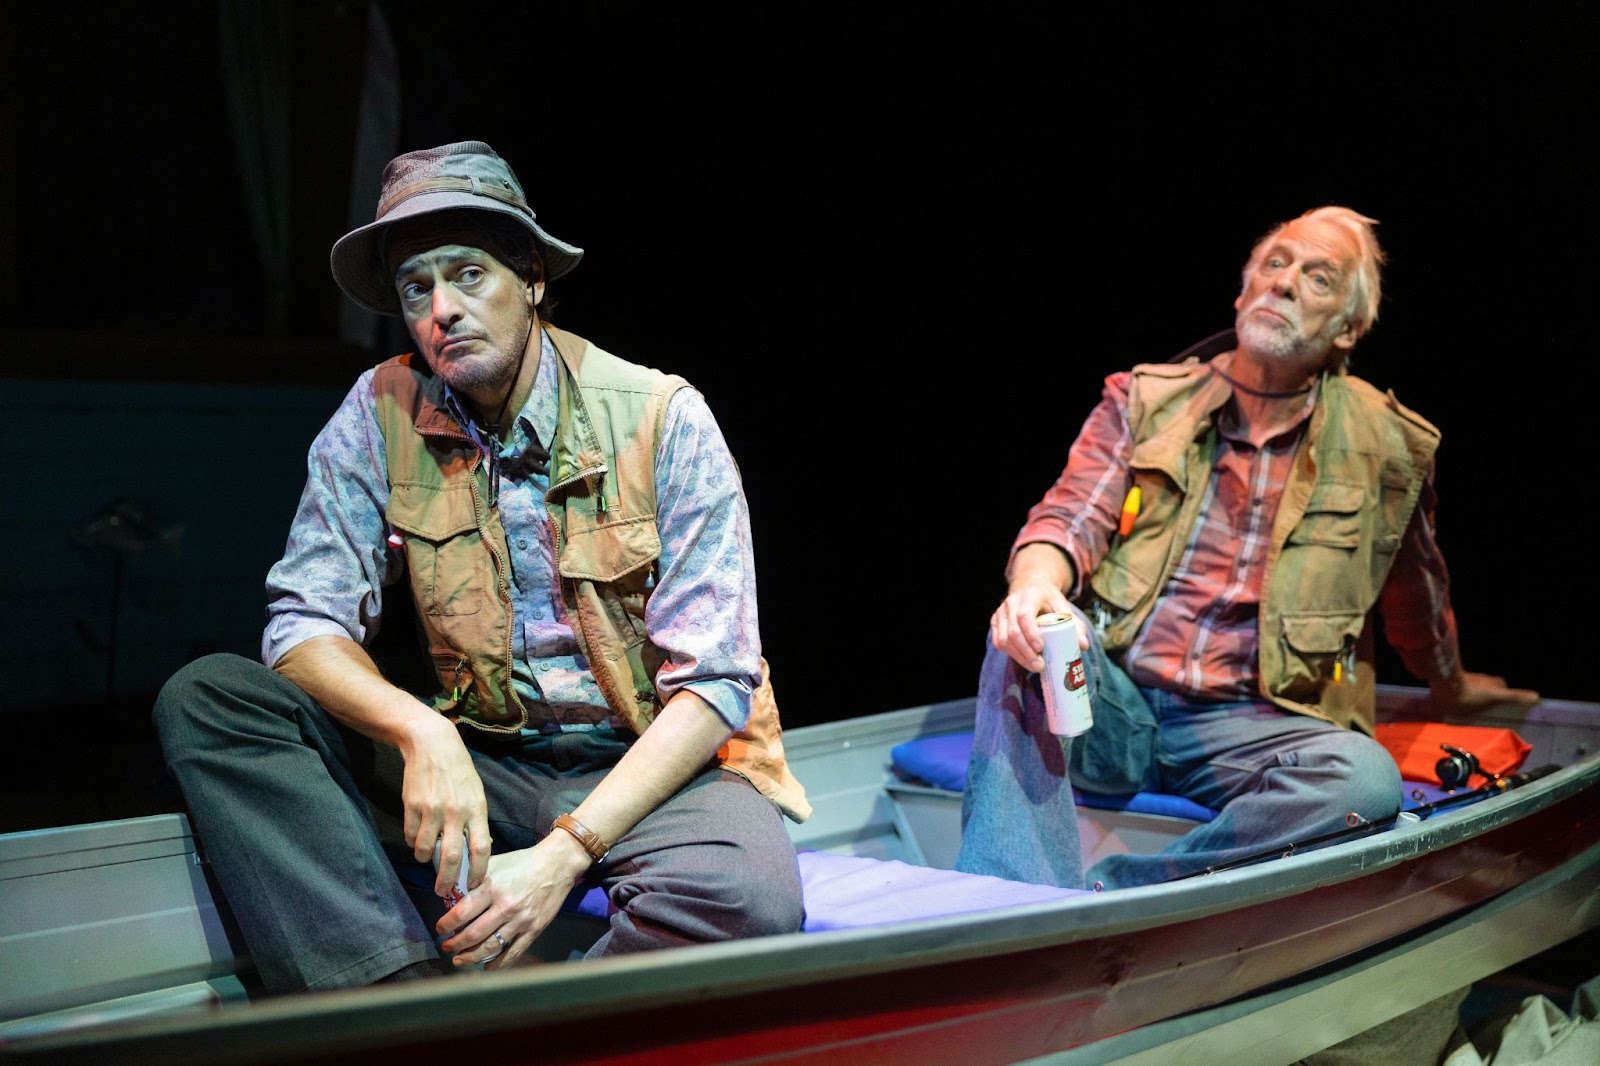 Two men sitting on a boat on stage.